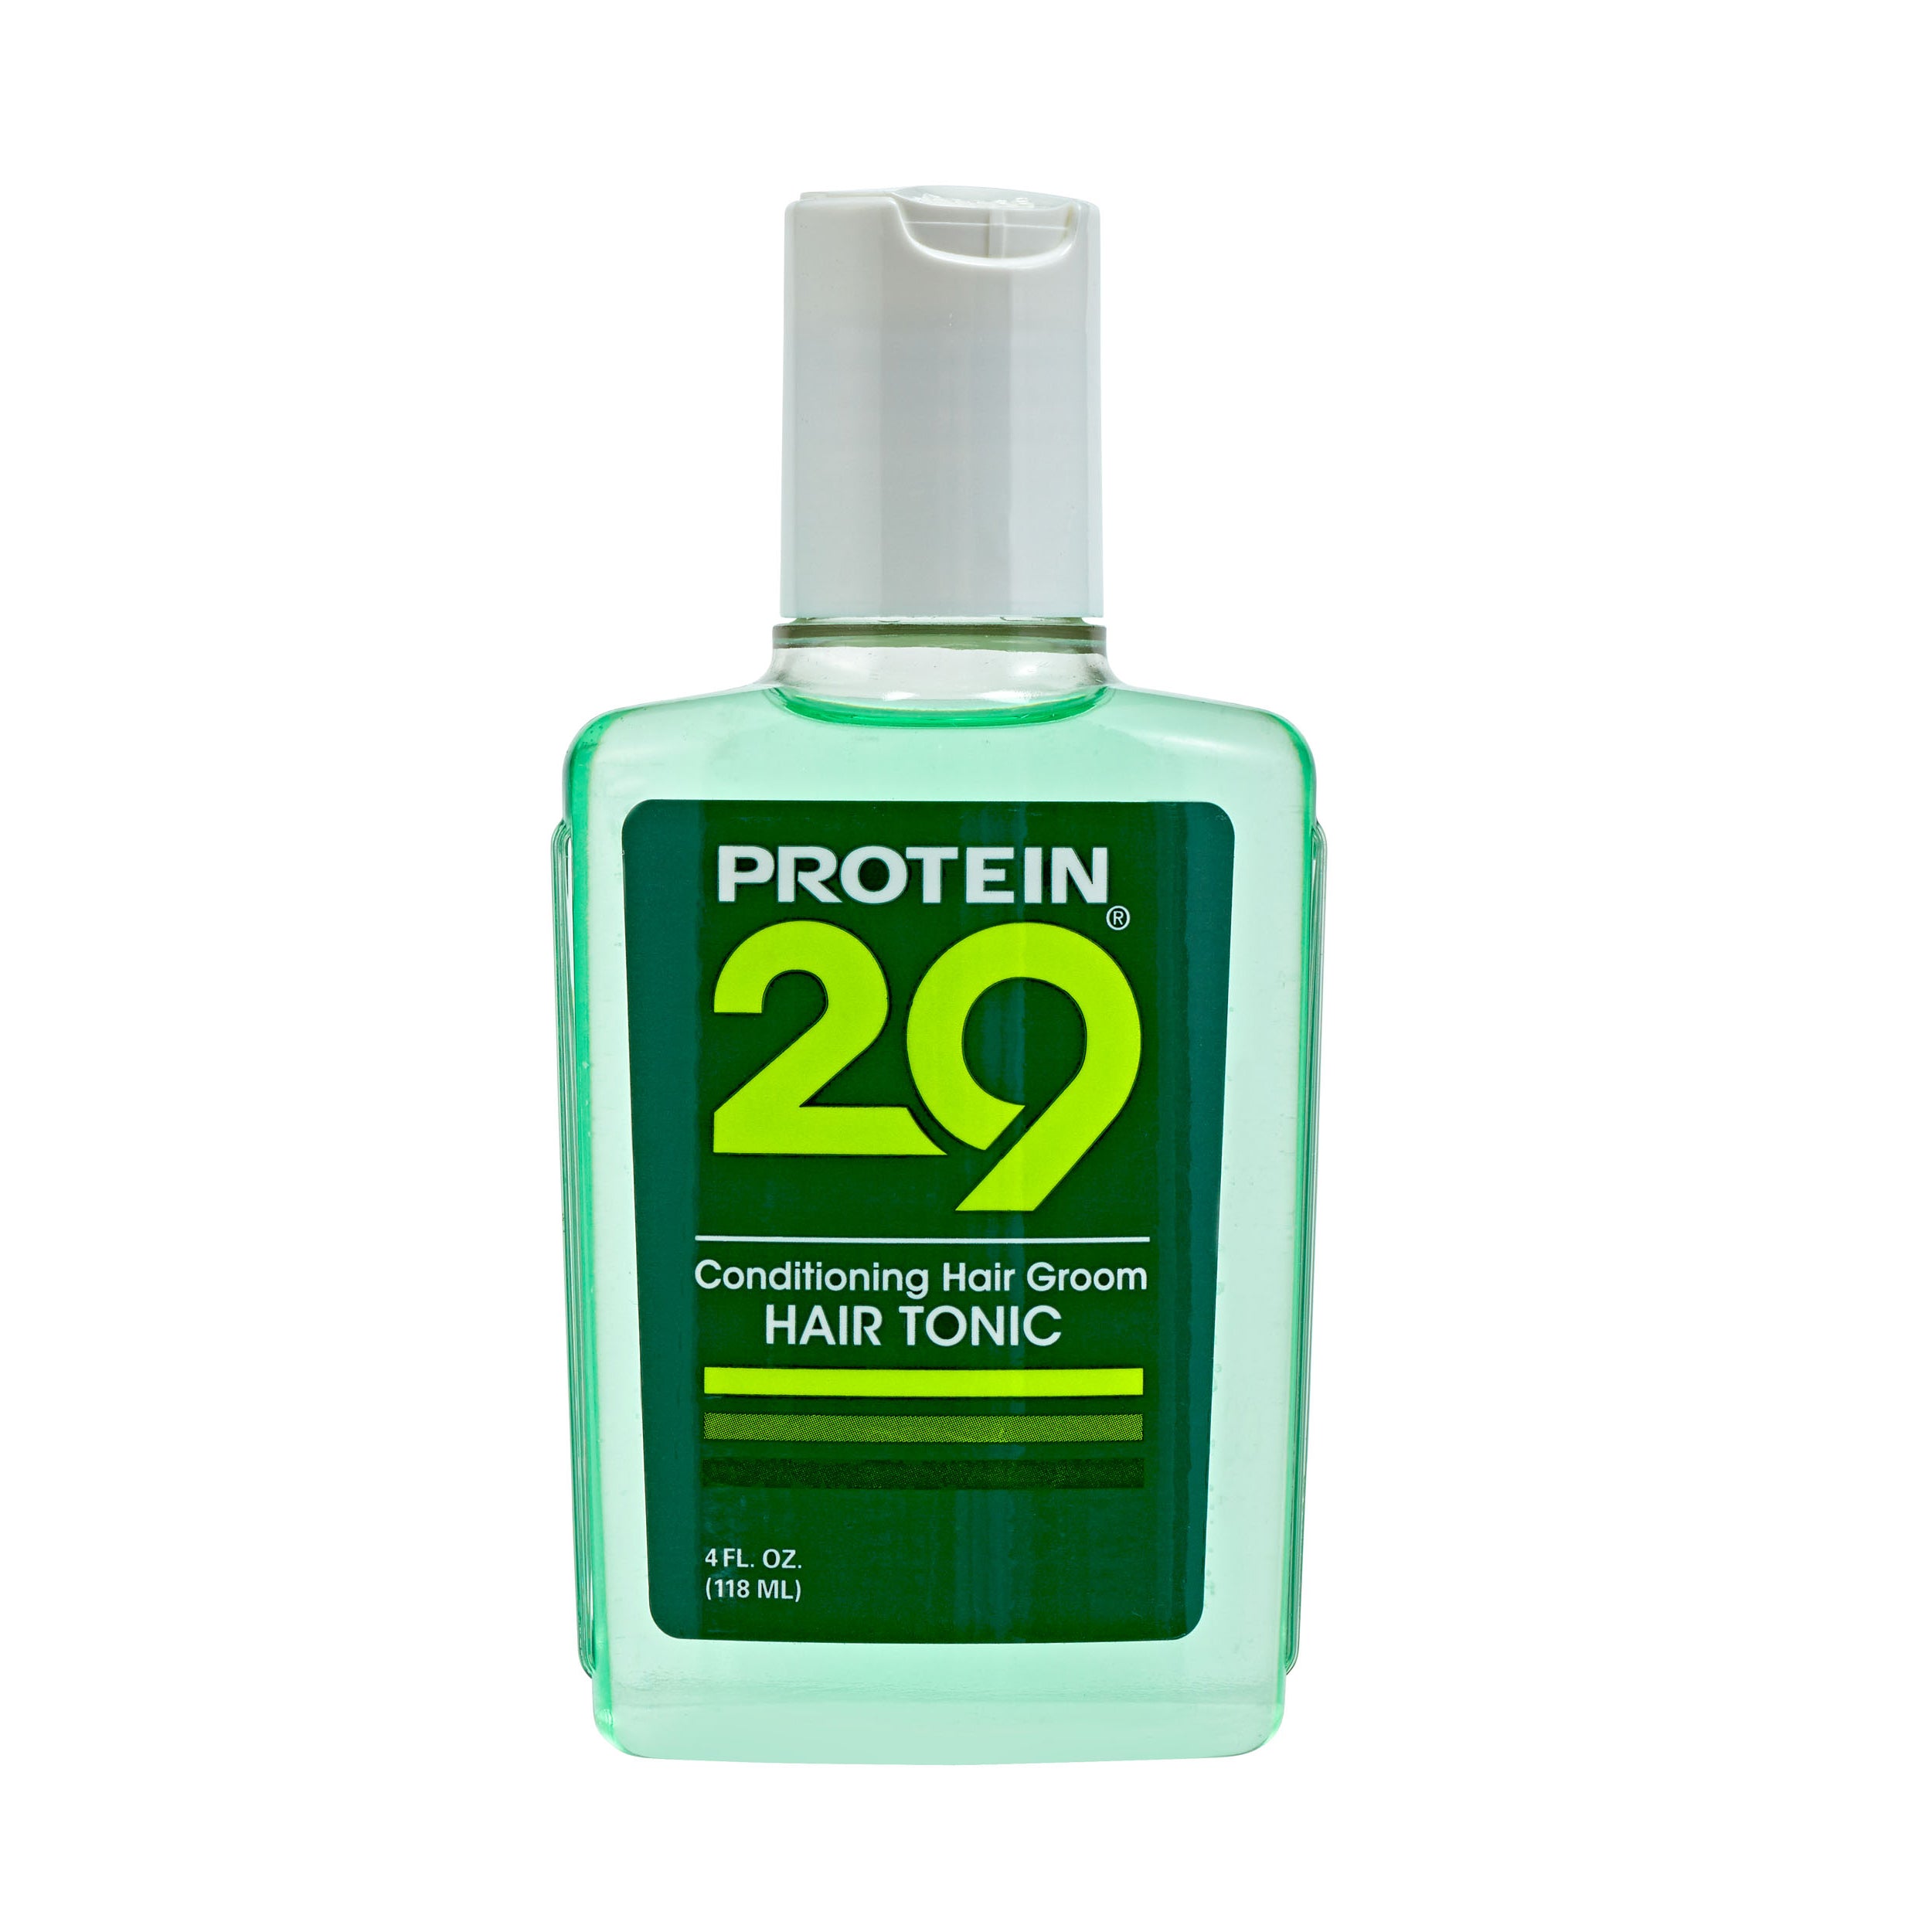 Protein 29 Conditioning Hair Groom Tonic